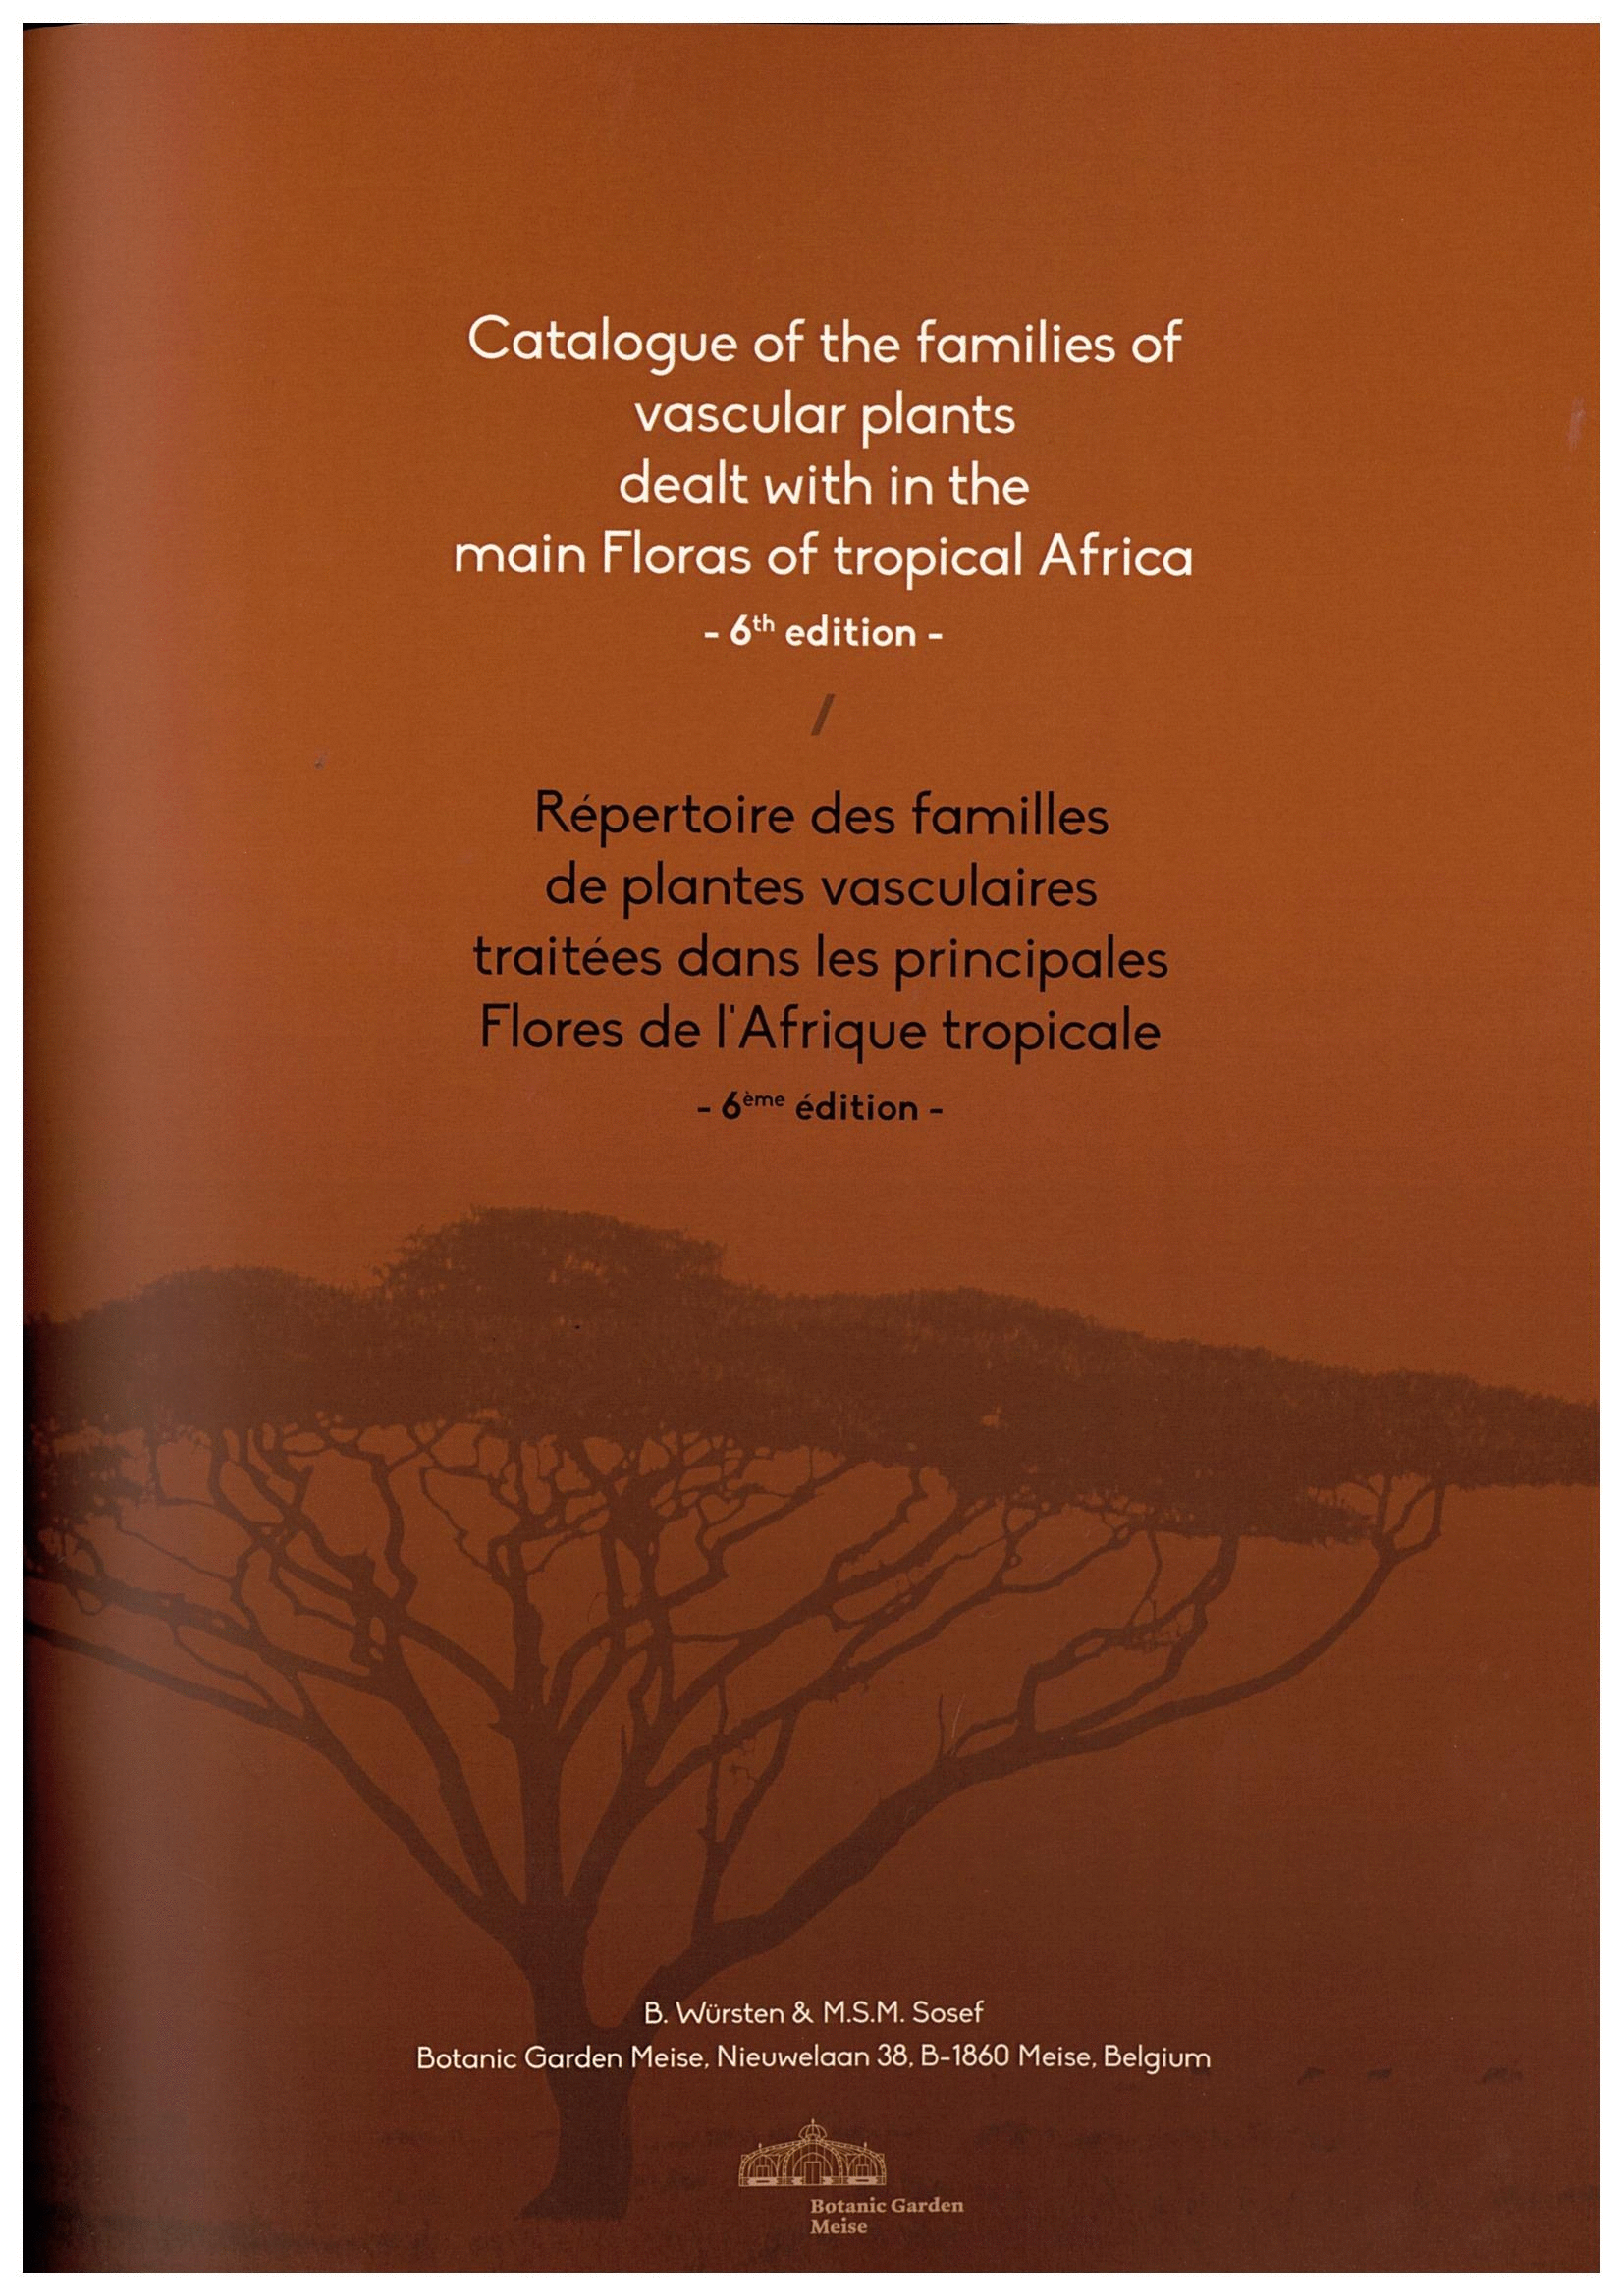 Catalogue of the families of vascular plants dealt with in the main Floras of tropical Africa – 6th edition